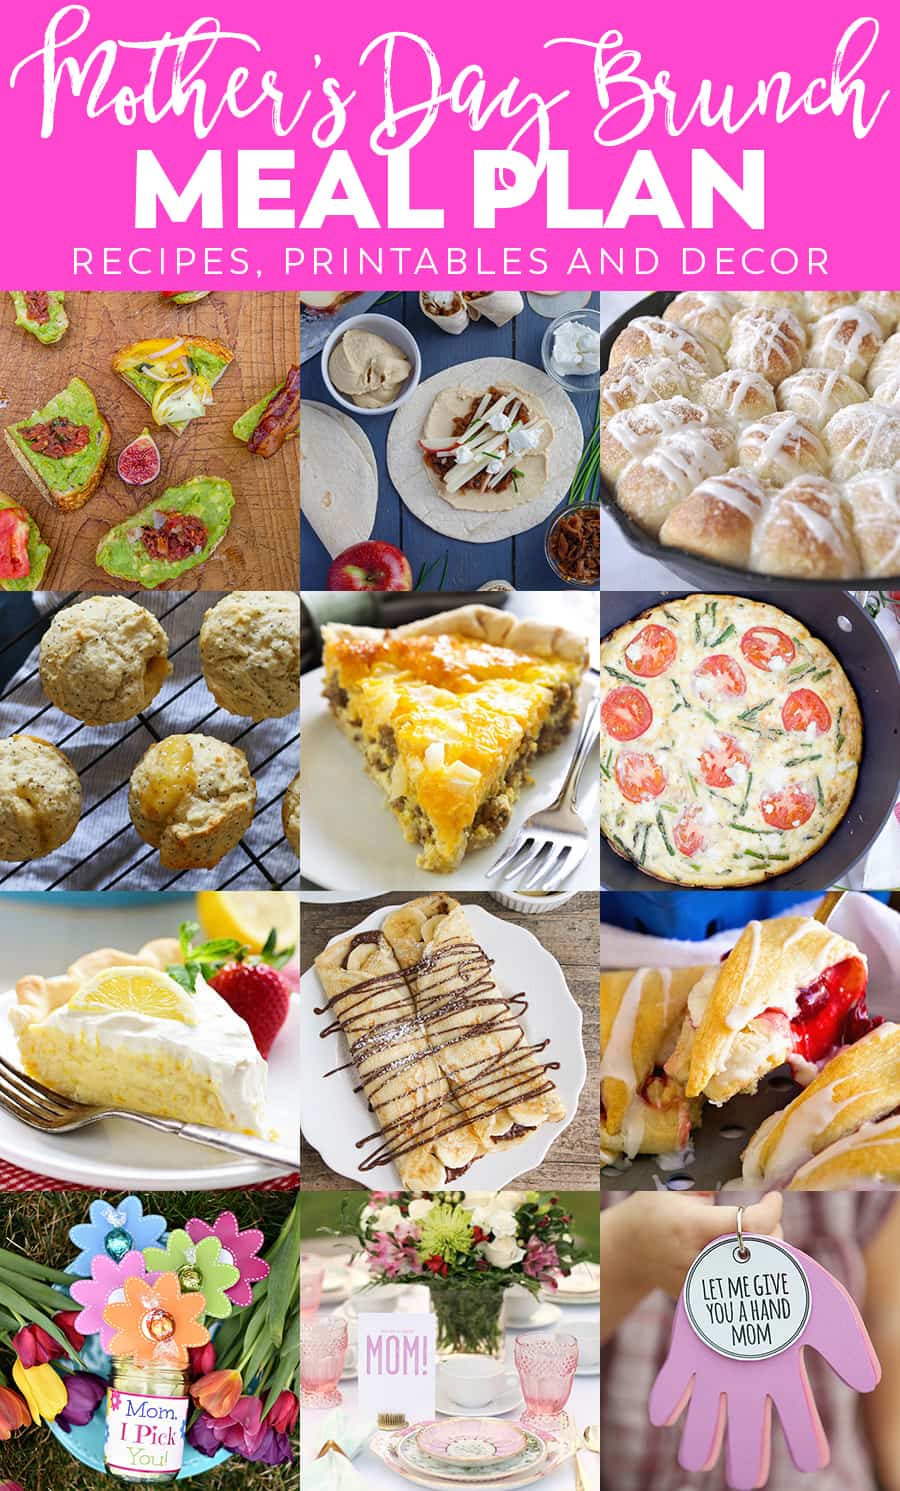 Mother's Day Brunch Meal Plan